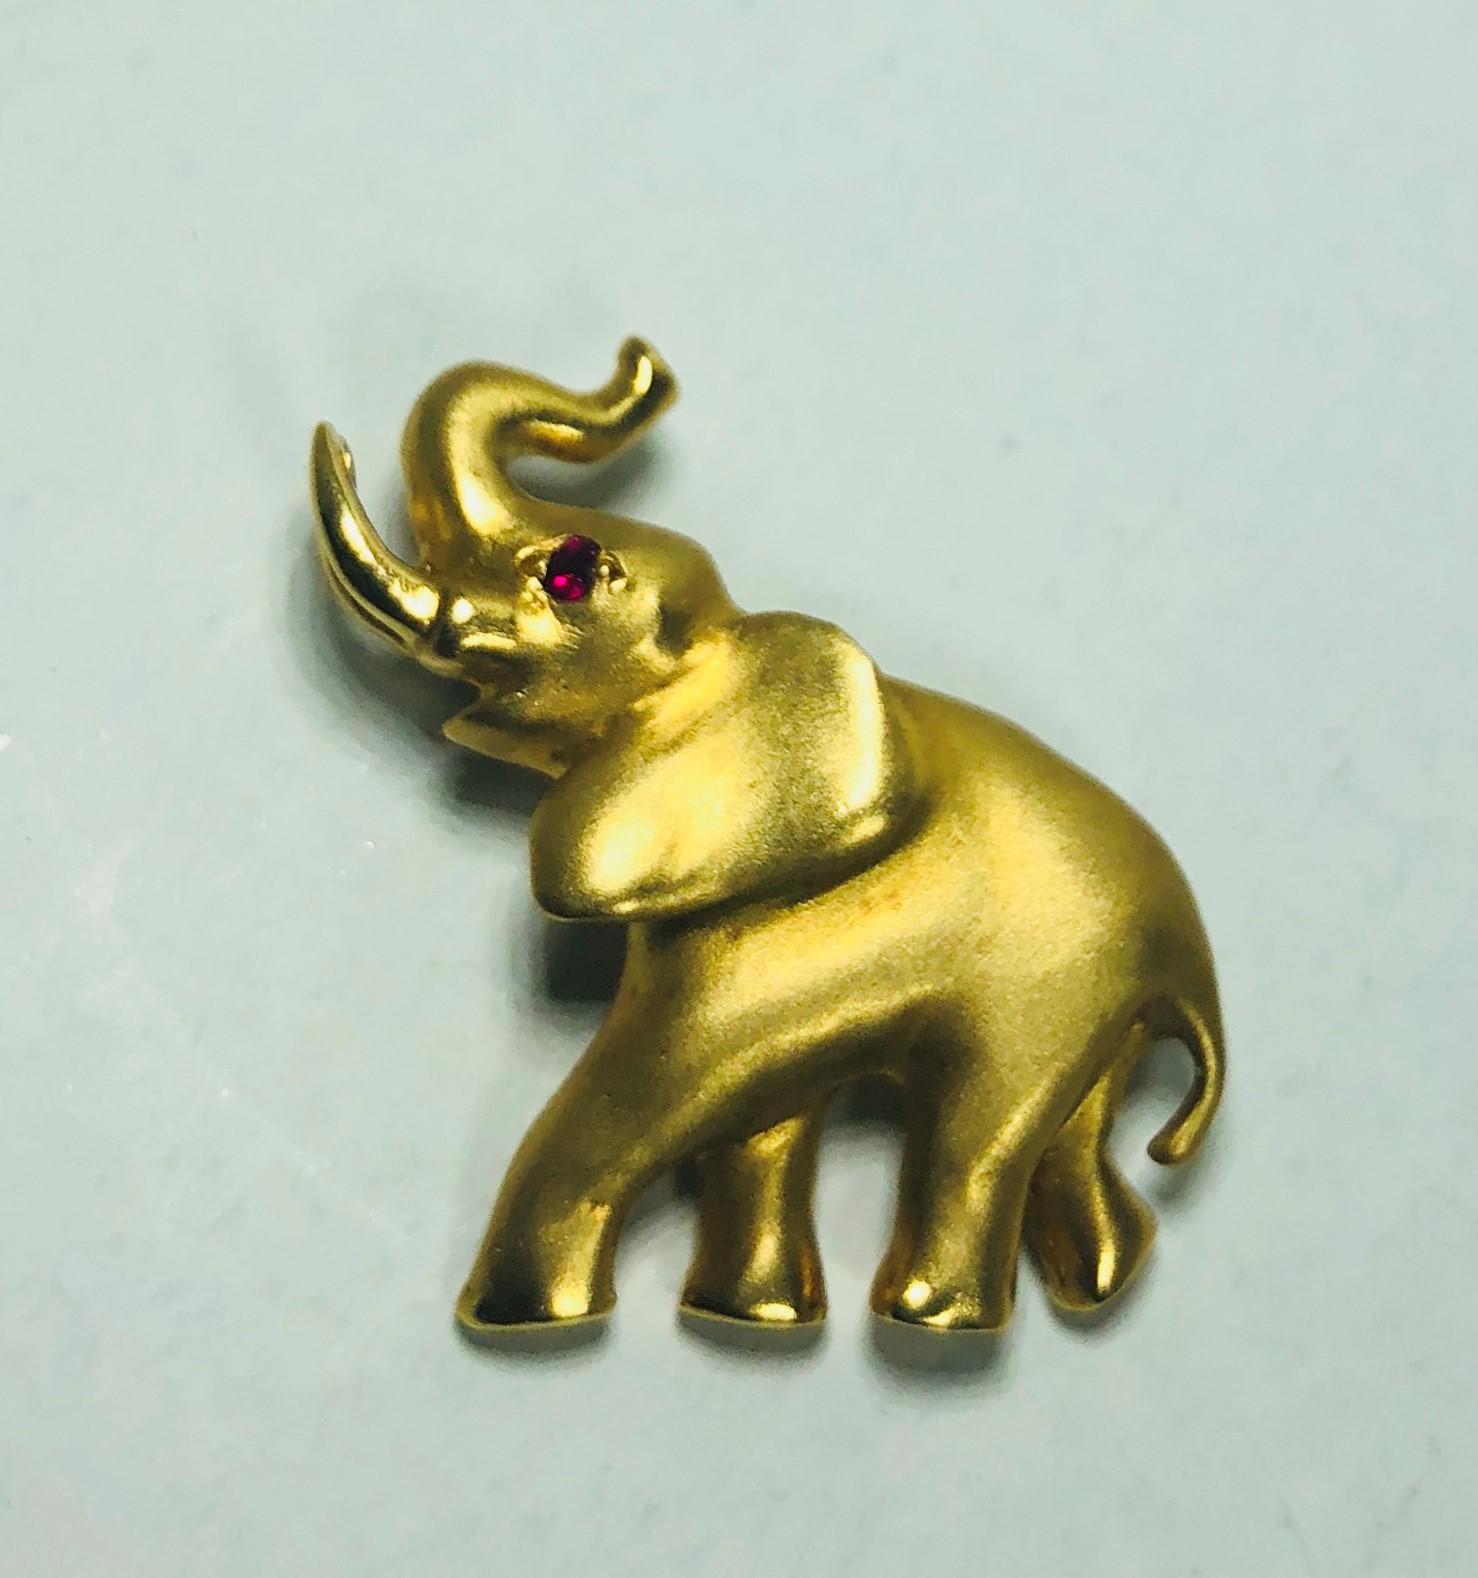 Mark Schneider 18 karat yellow gold and ruby elephant brooch. This is an authentic Mark Schneider original, created in 18 karat yellow gold, weight= 4.9 dwt, 7.7 grams. This brooch/pin has a 1.6mm round ruby 